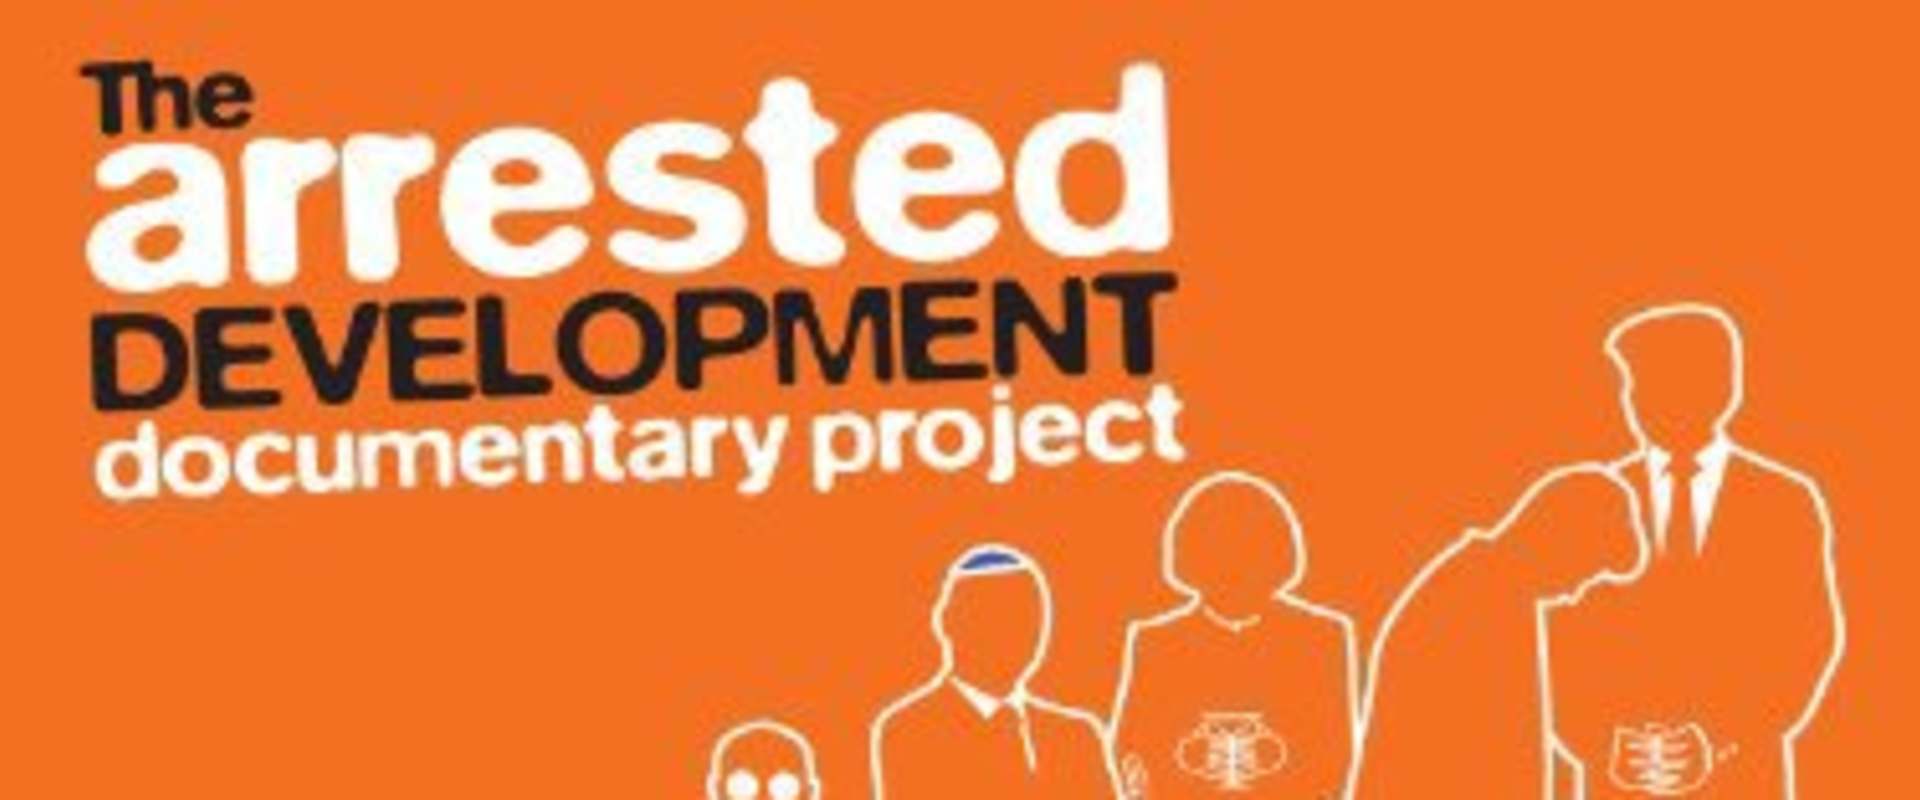 The Arrested Development Documentary Project background 1